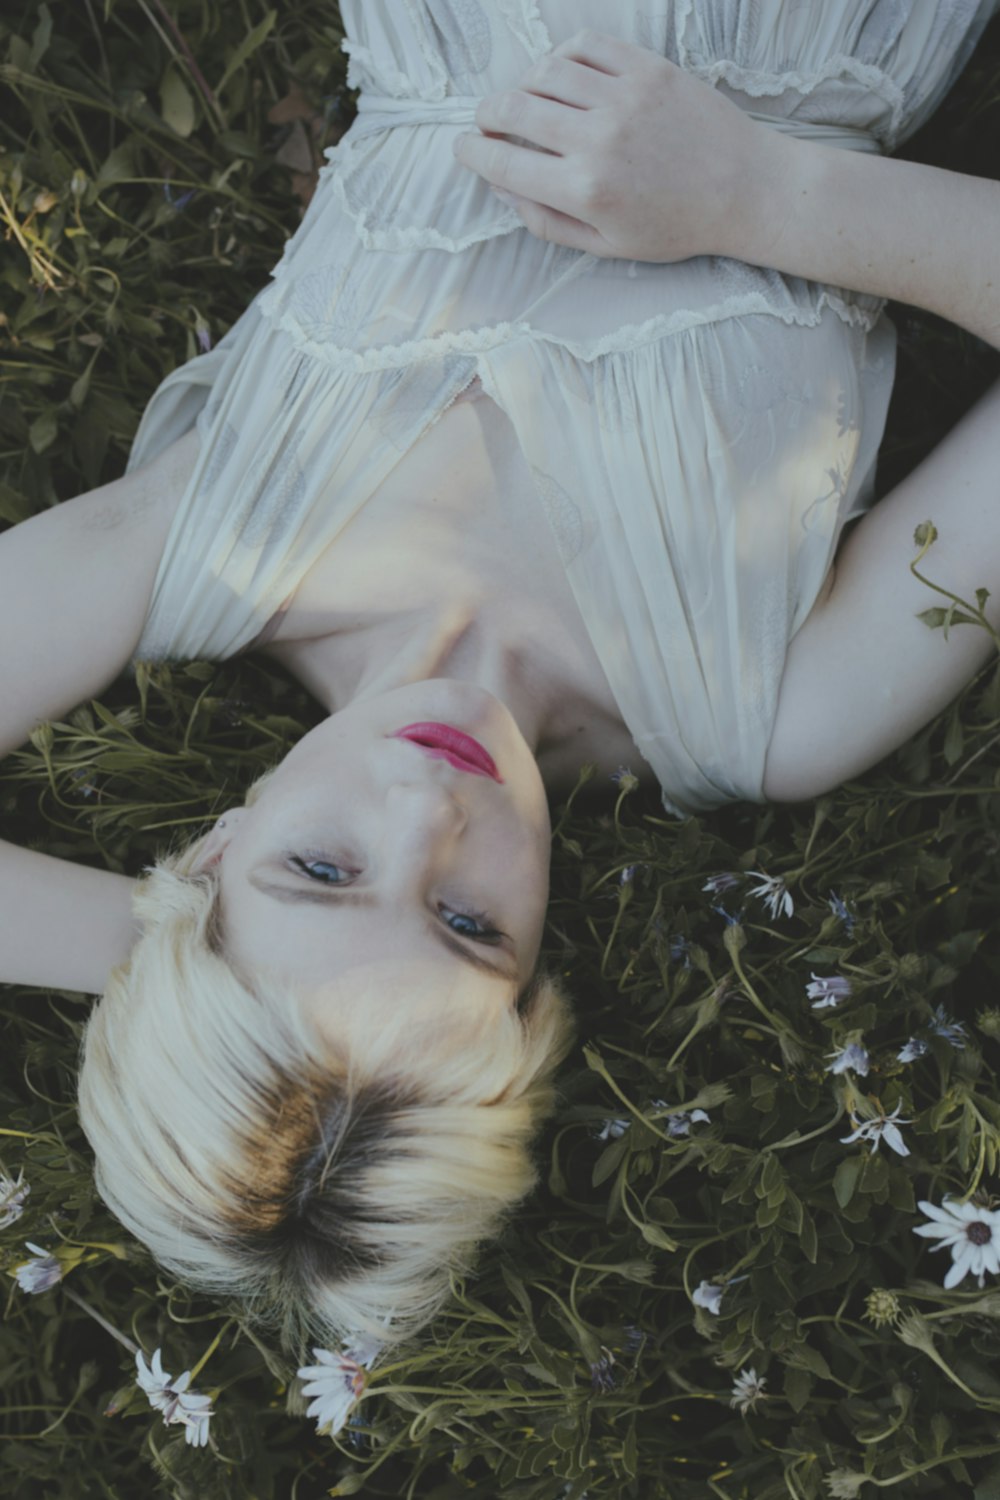 woman in white dress lying on green grass